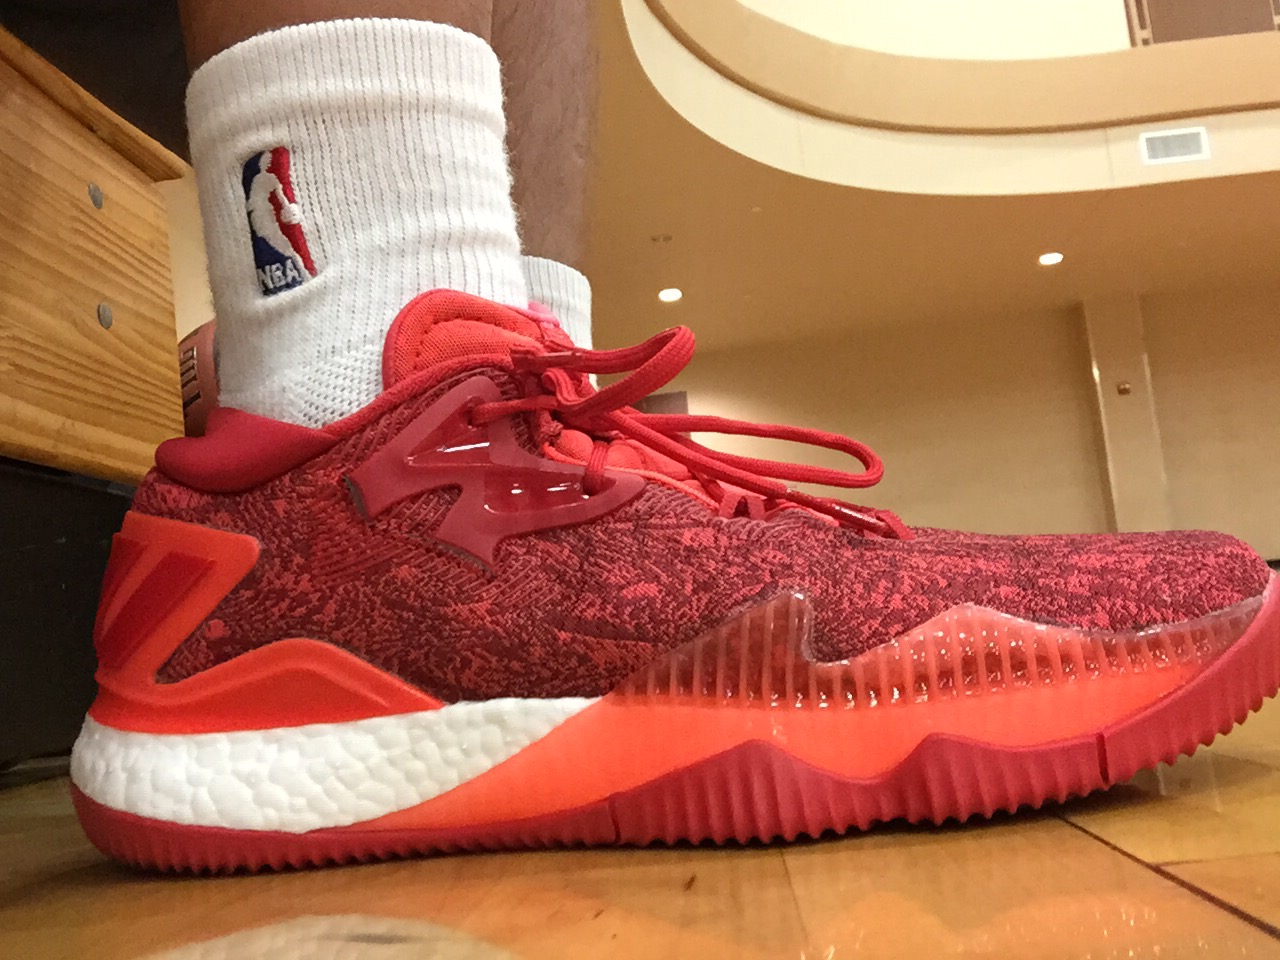 adidas crazylight boost 2016 review